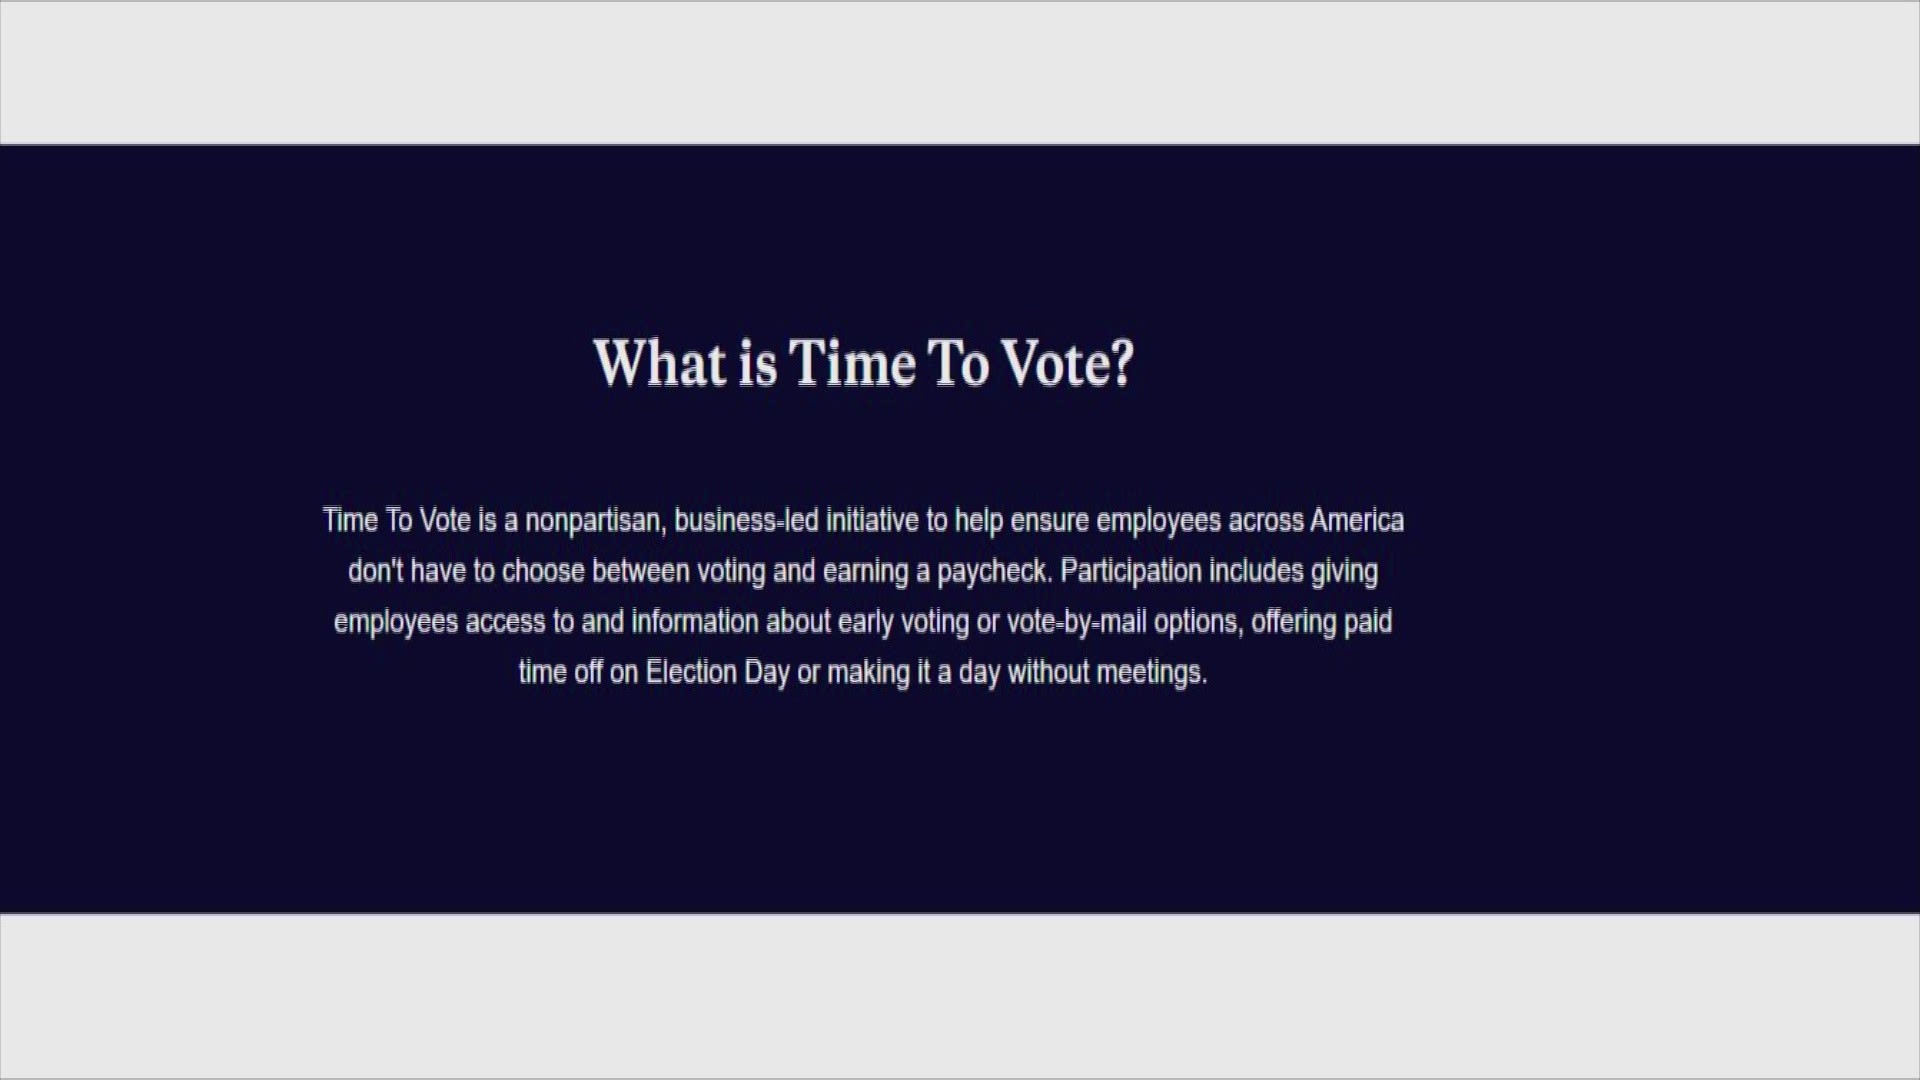 Businesses nationwide have joined the "Time to Vote" coalition, which aims to increase voter participating by working with employers to allow workers time to vote.